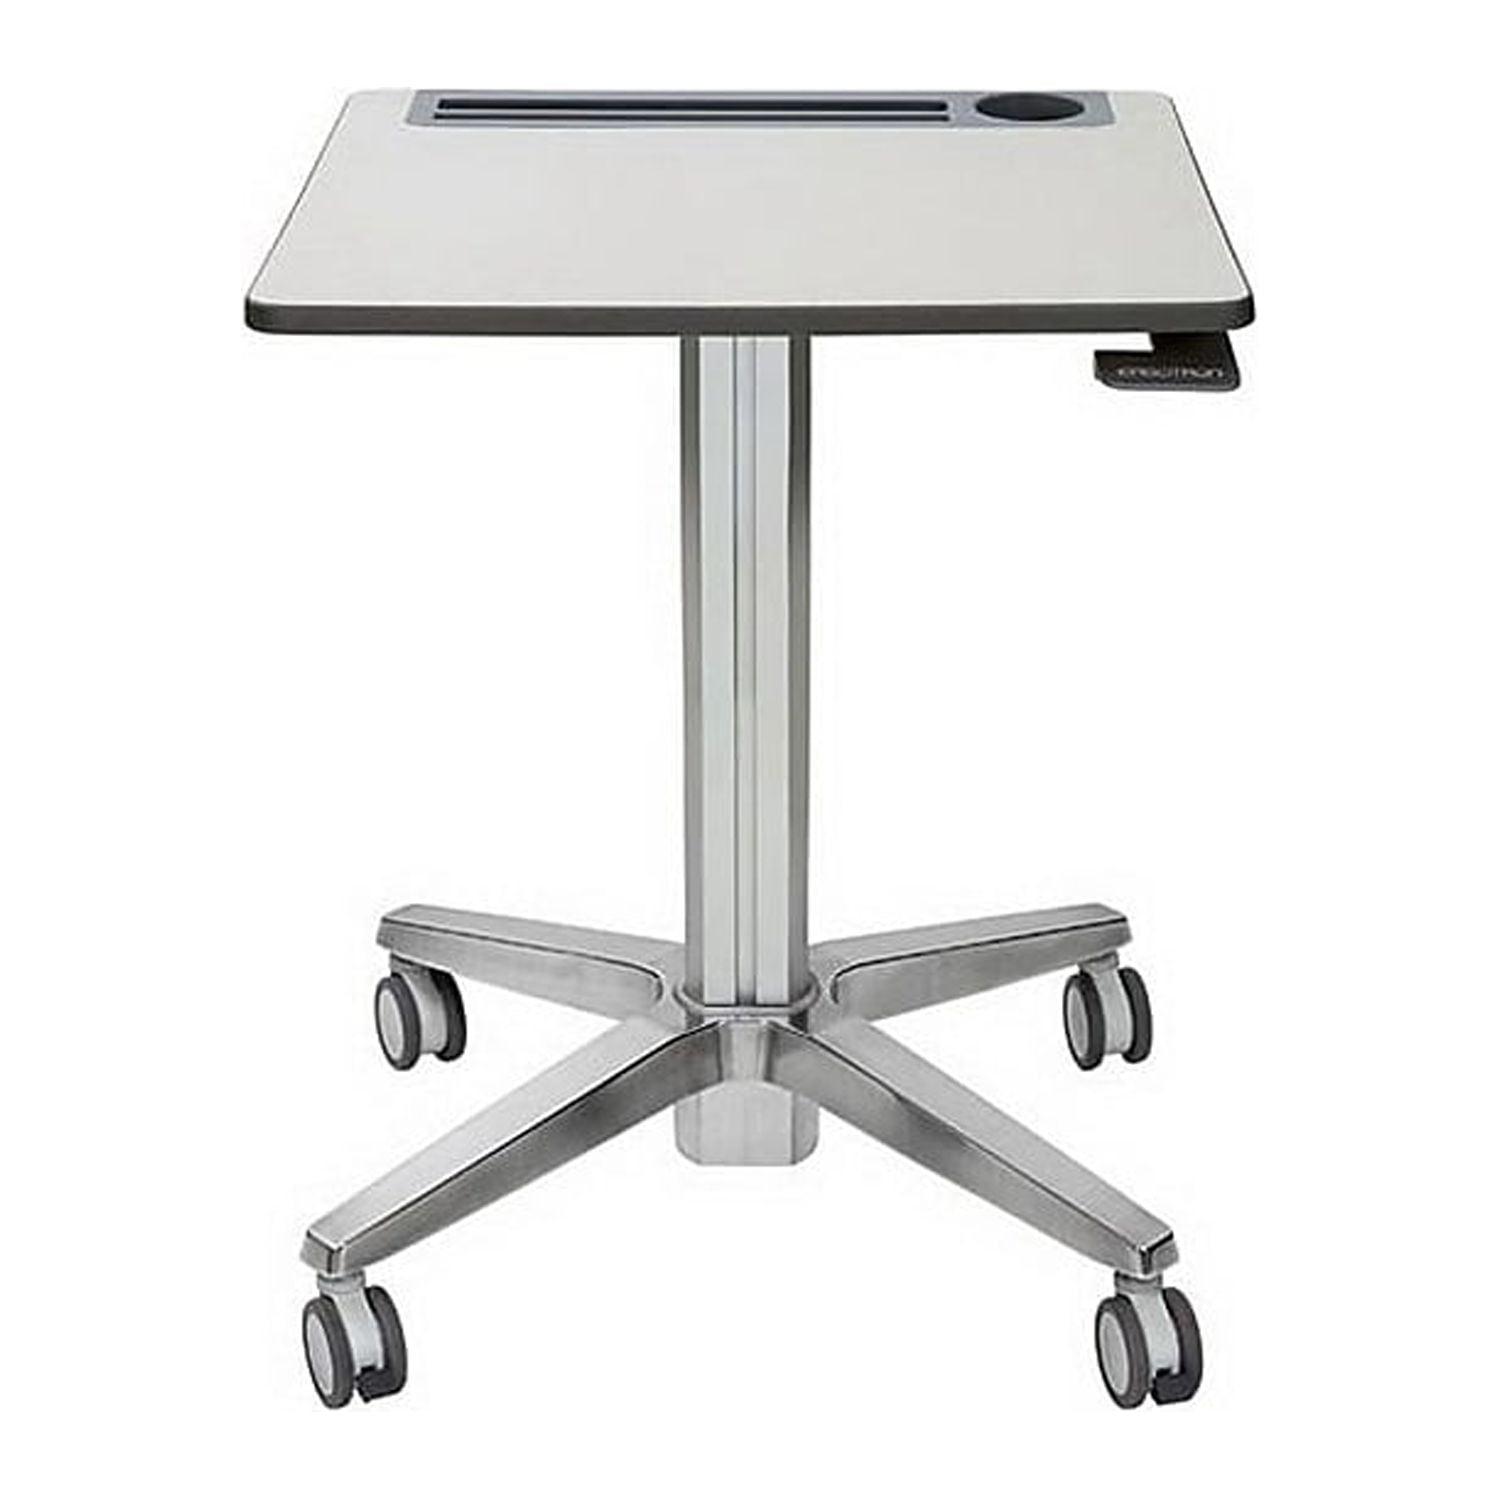 Adjustable White MDF Mobile Sit/Standing Desk with Cup Holder